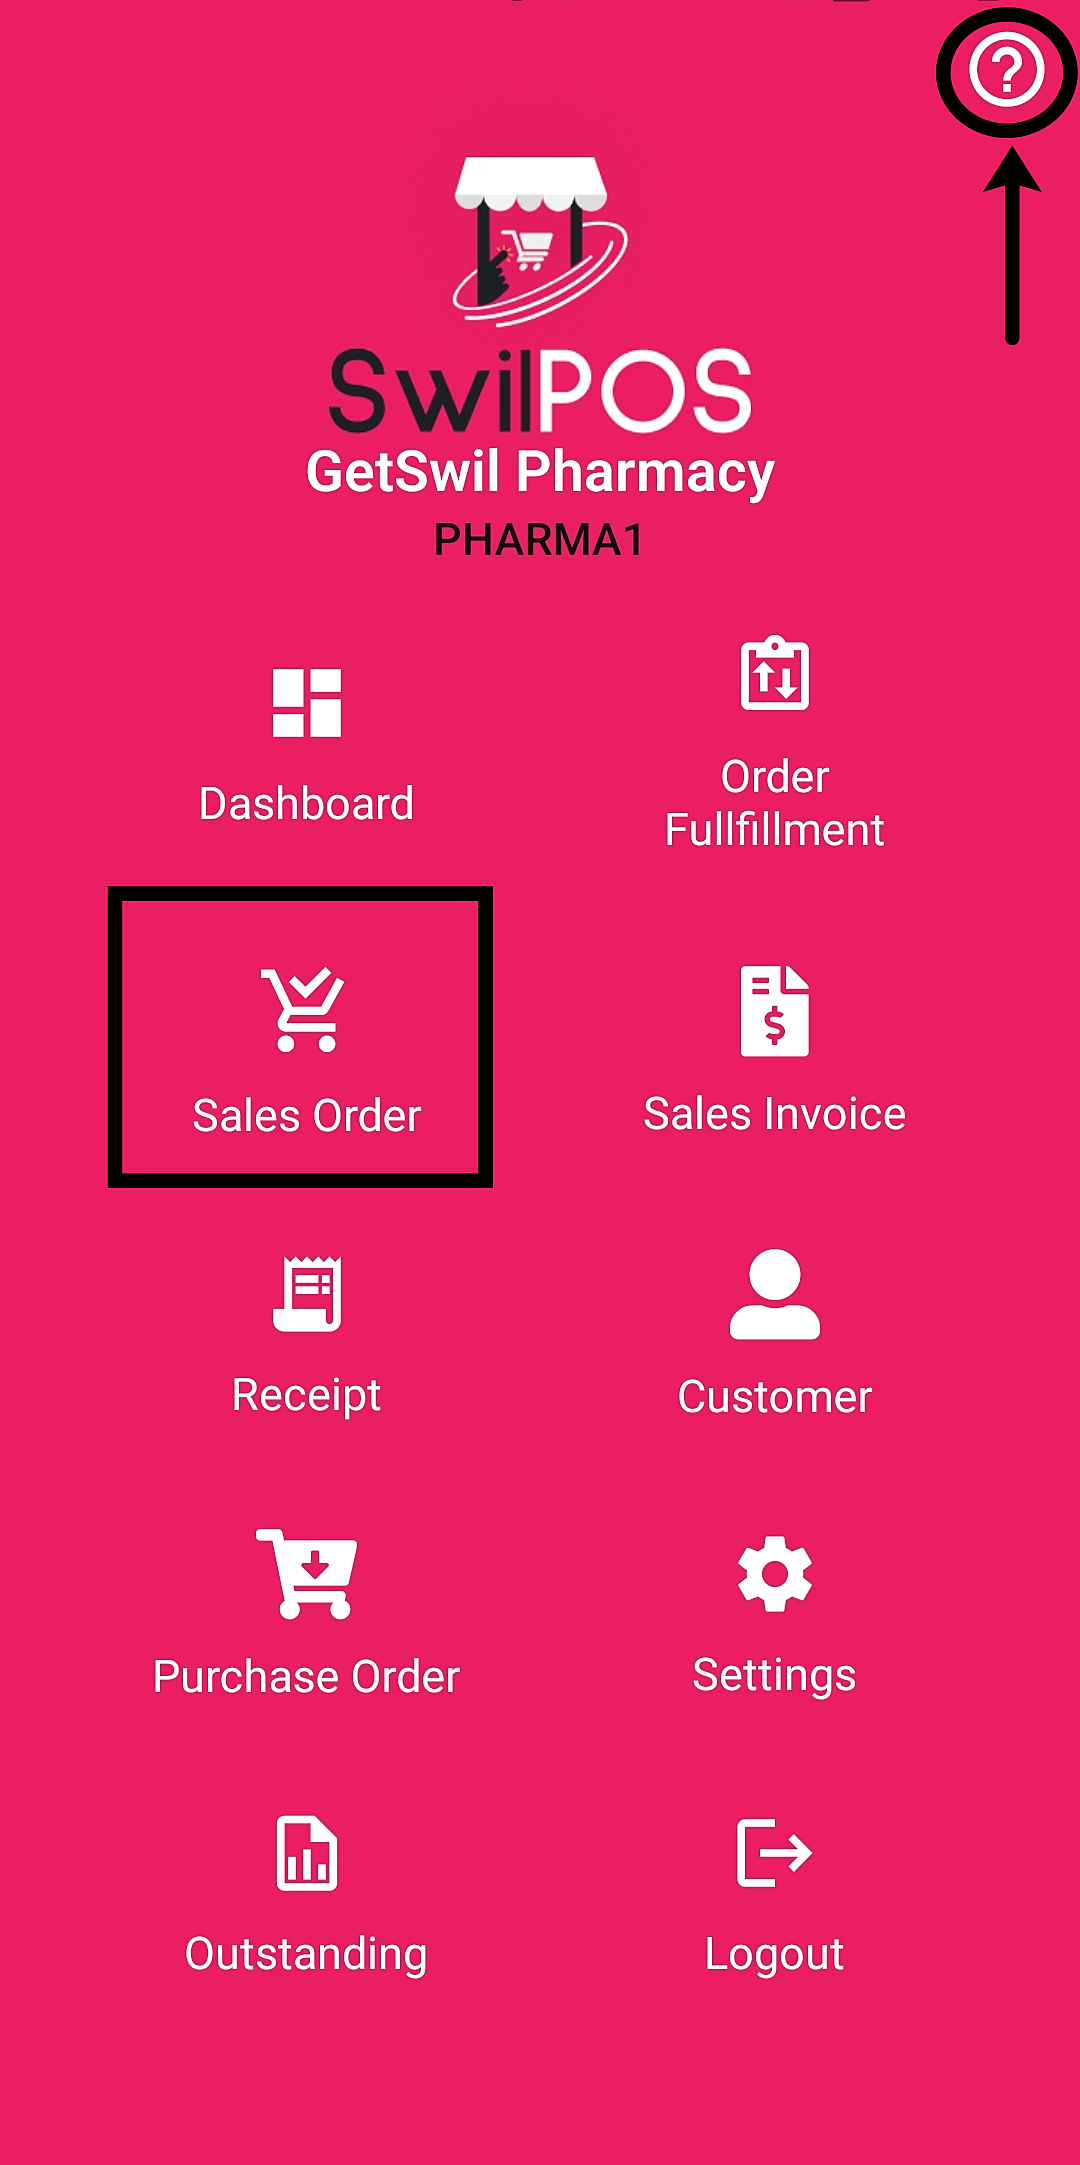 Menu interface of the SWILPOS app highlighting the Sales Order and Help icons for user assistance.